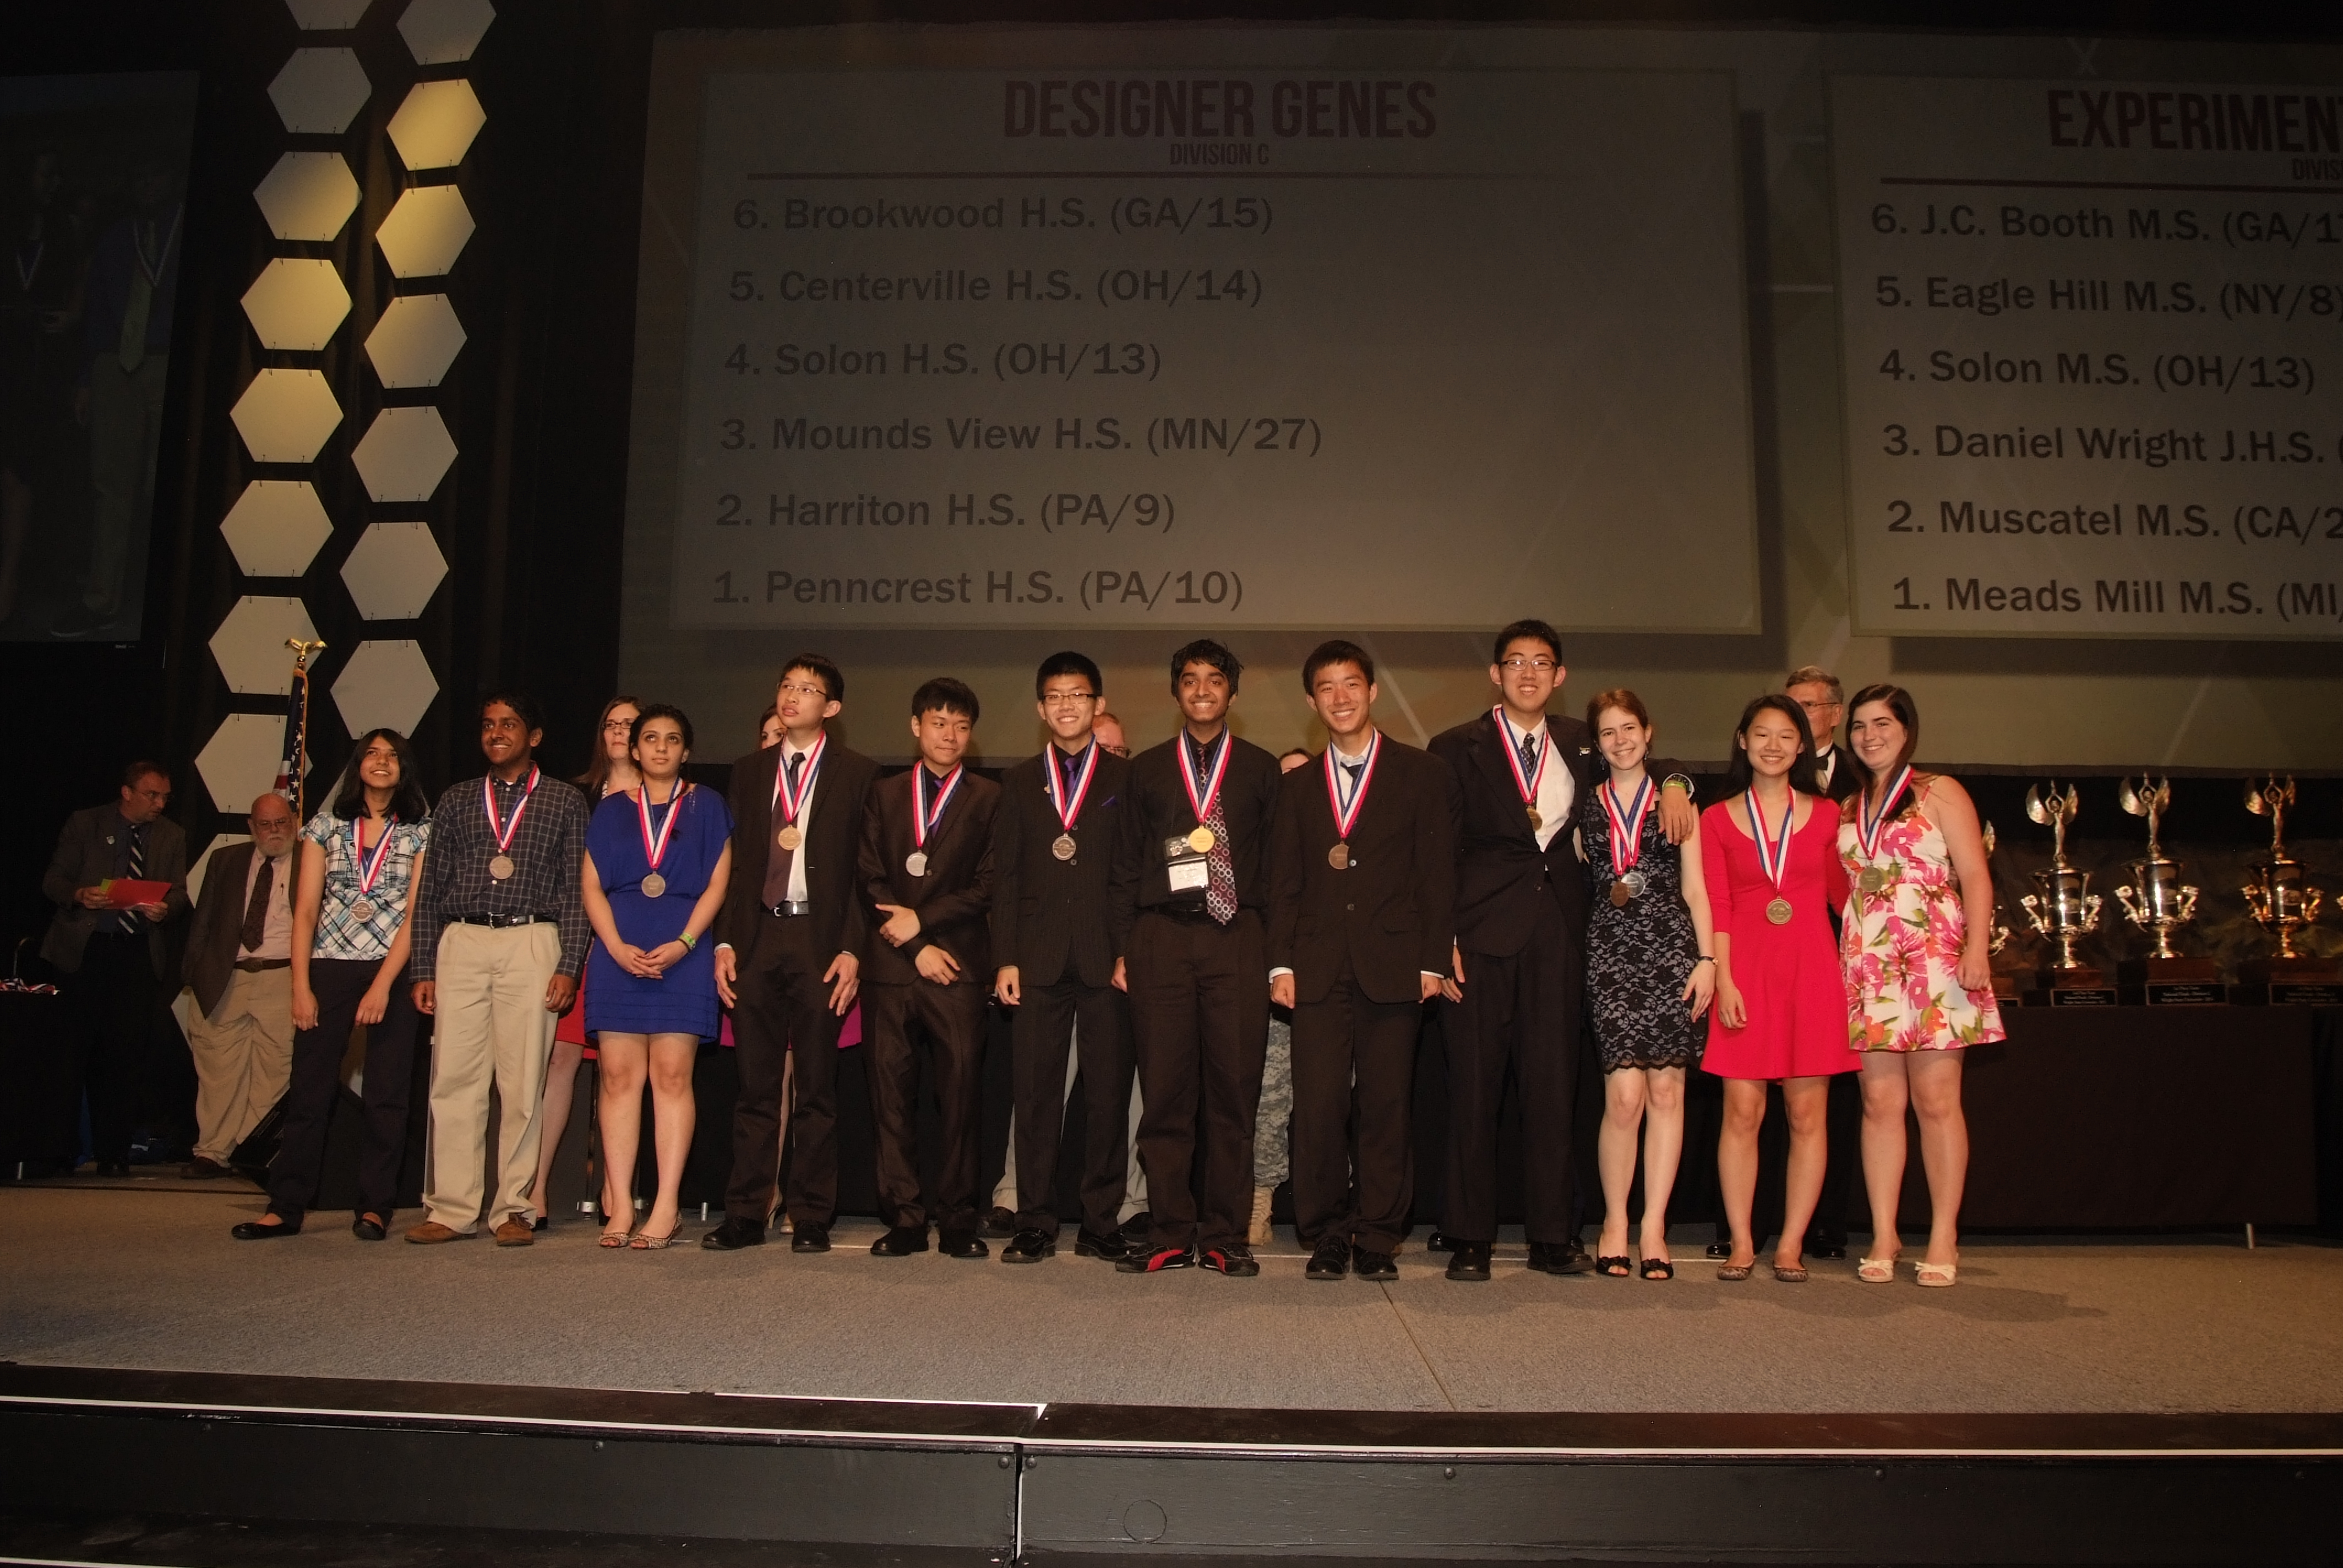 Winners of the Designer Genes event at the 2013 National Tournament at Wright State University